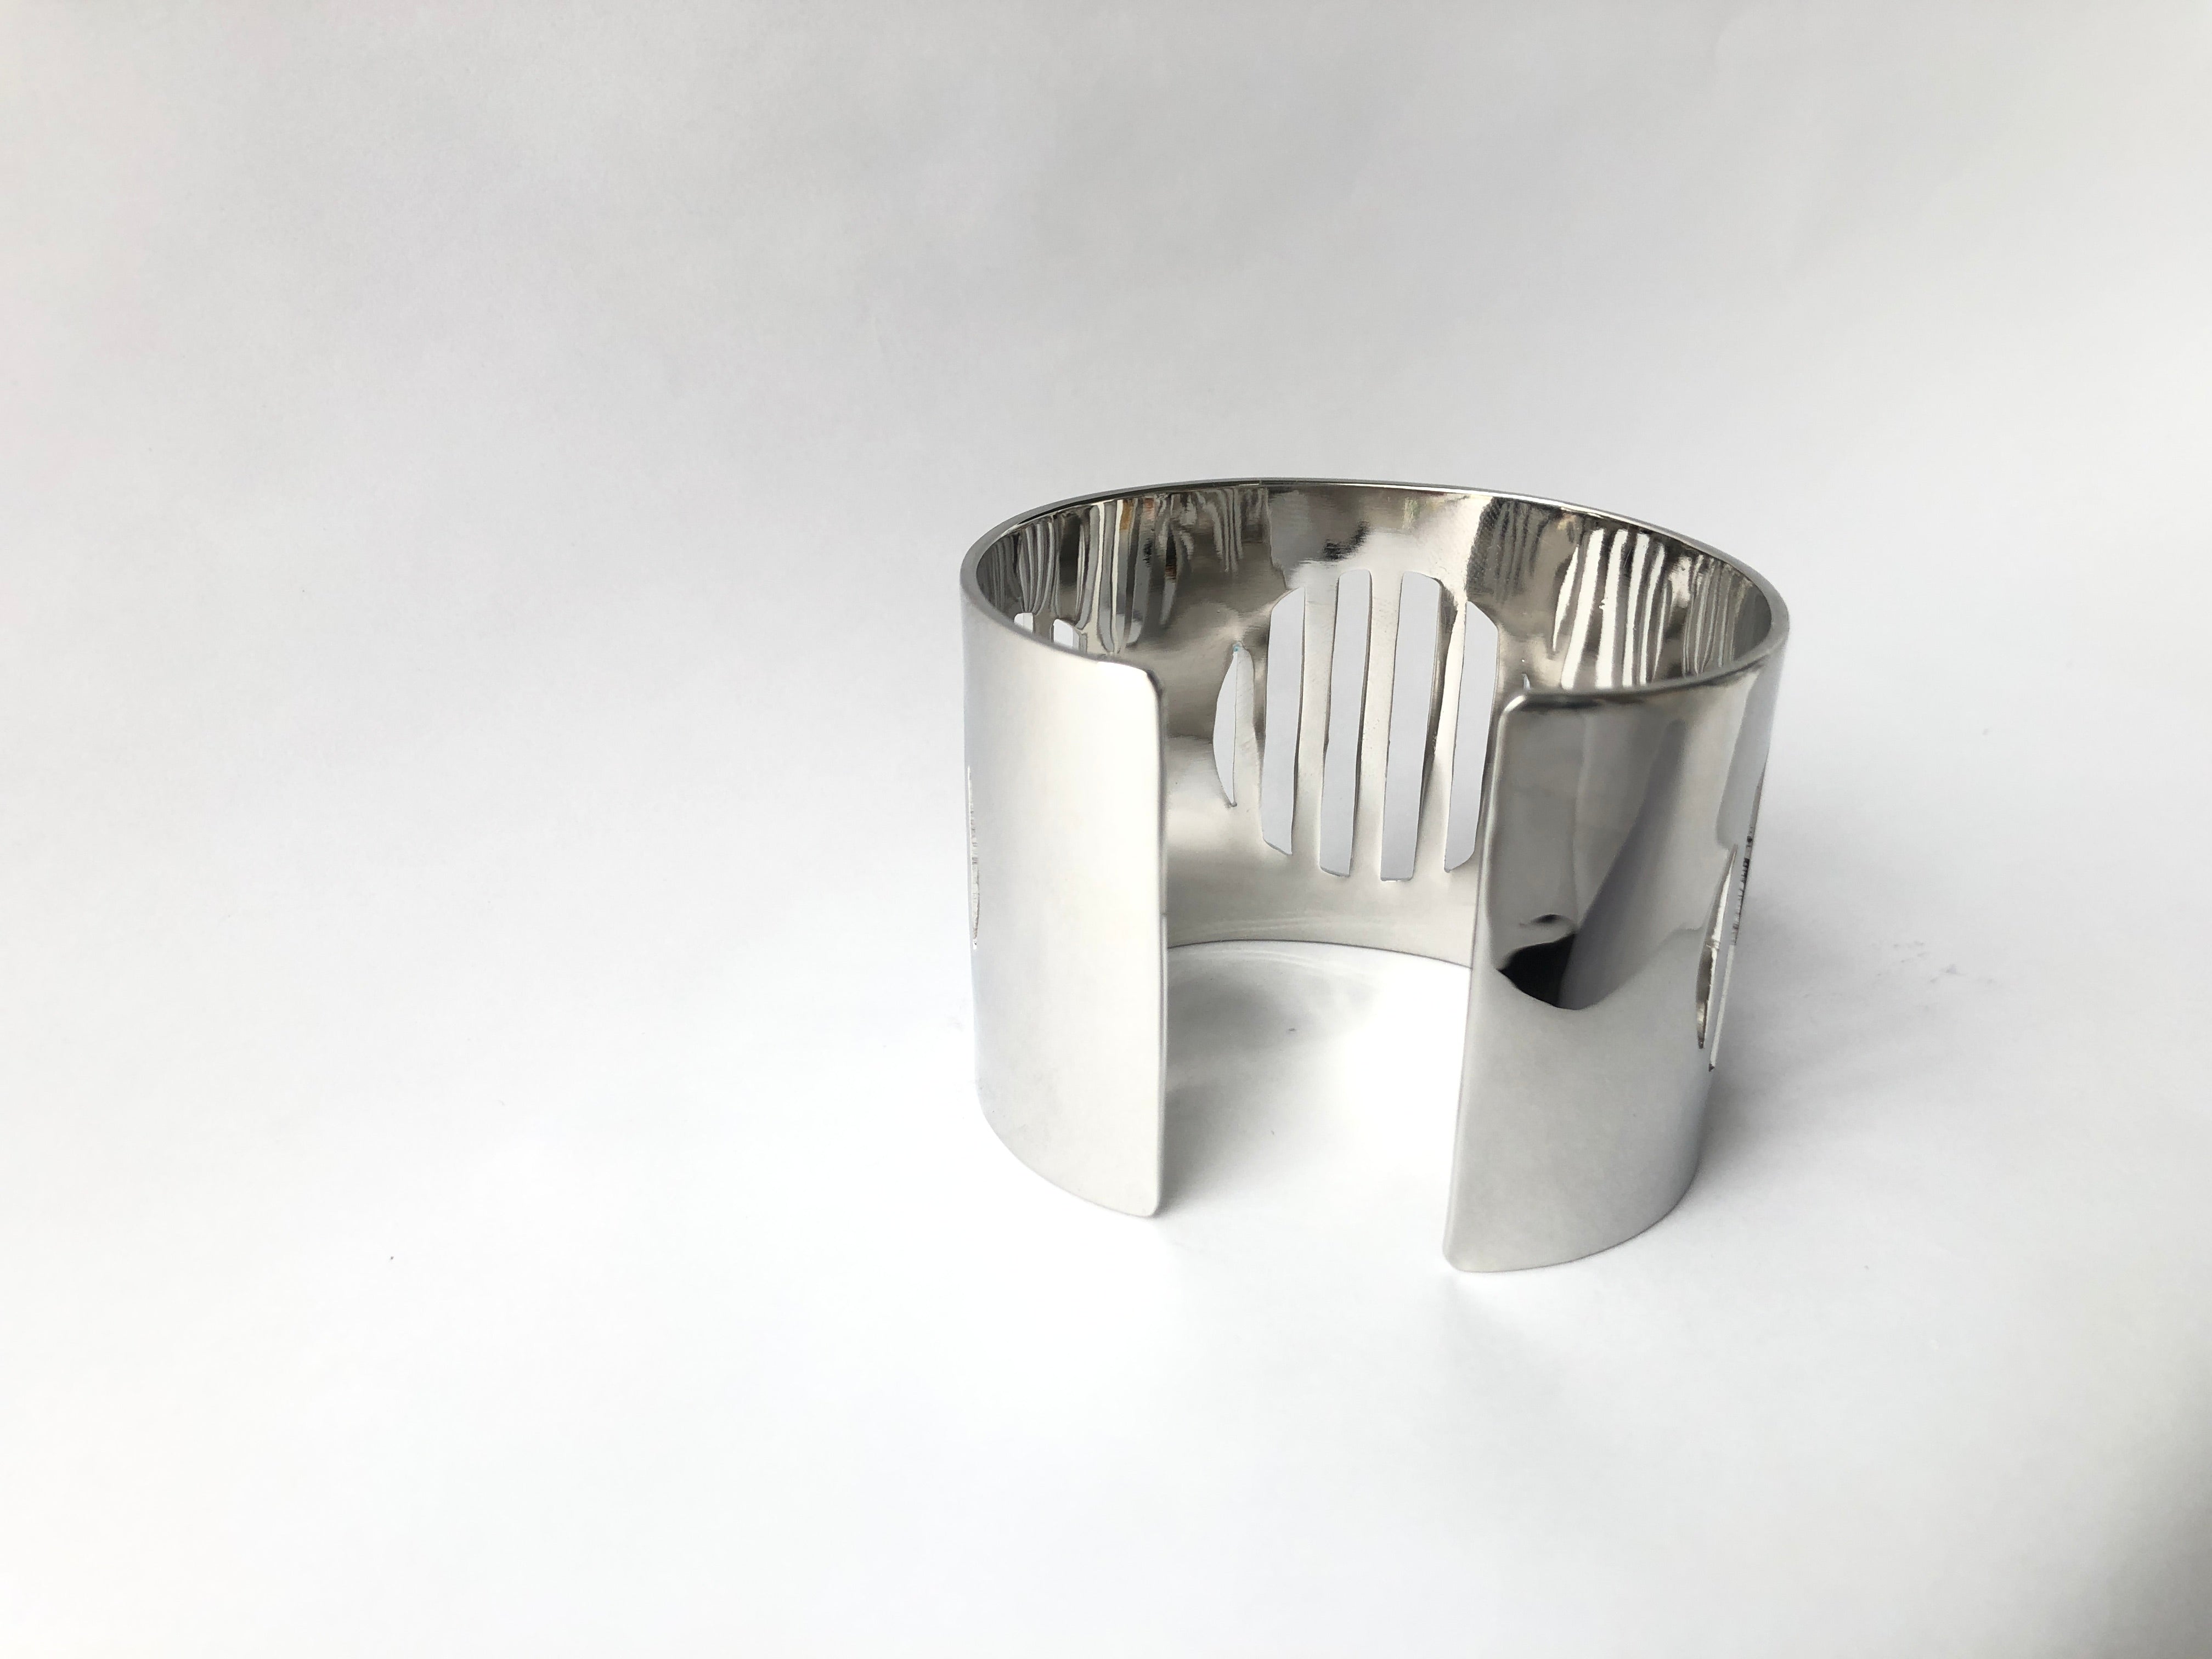 silver sustainable jewellery recycled rings cuffs bracelets ethical accessories women